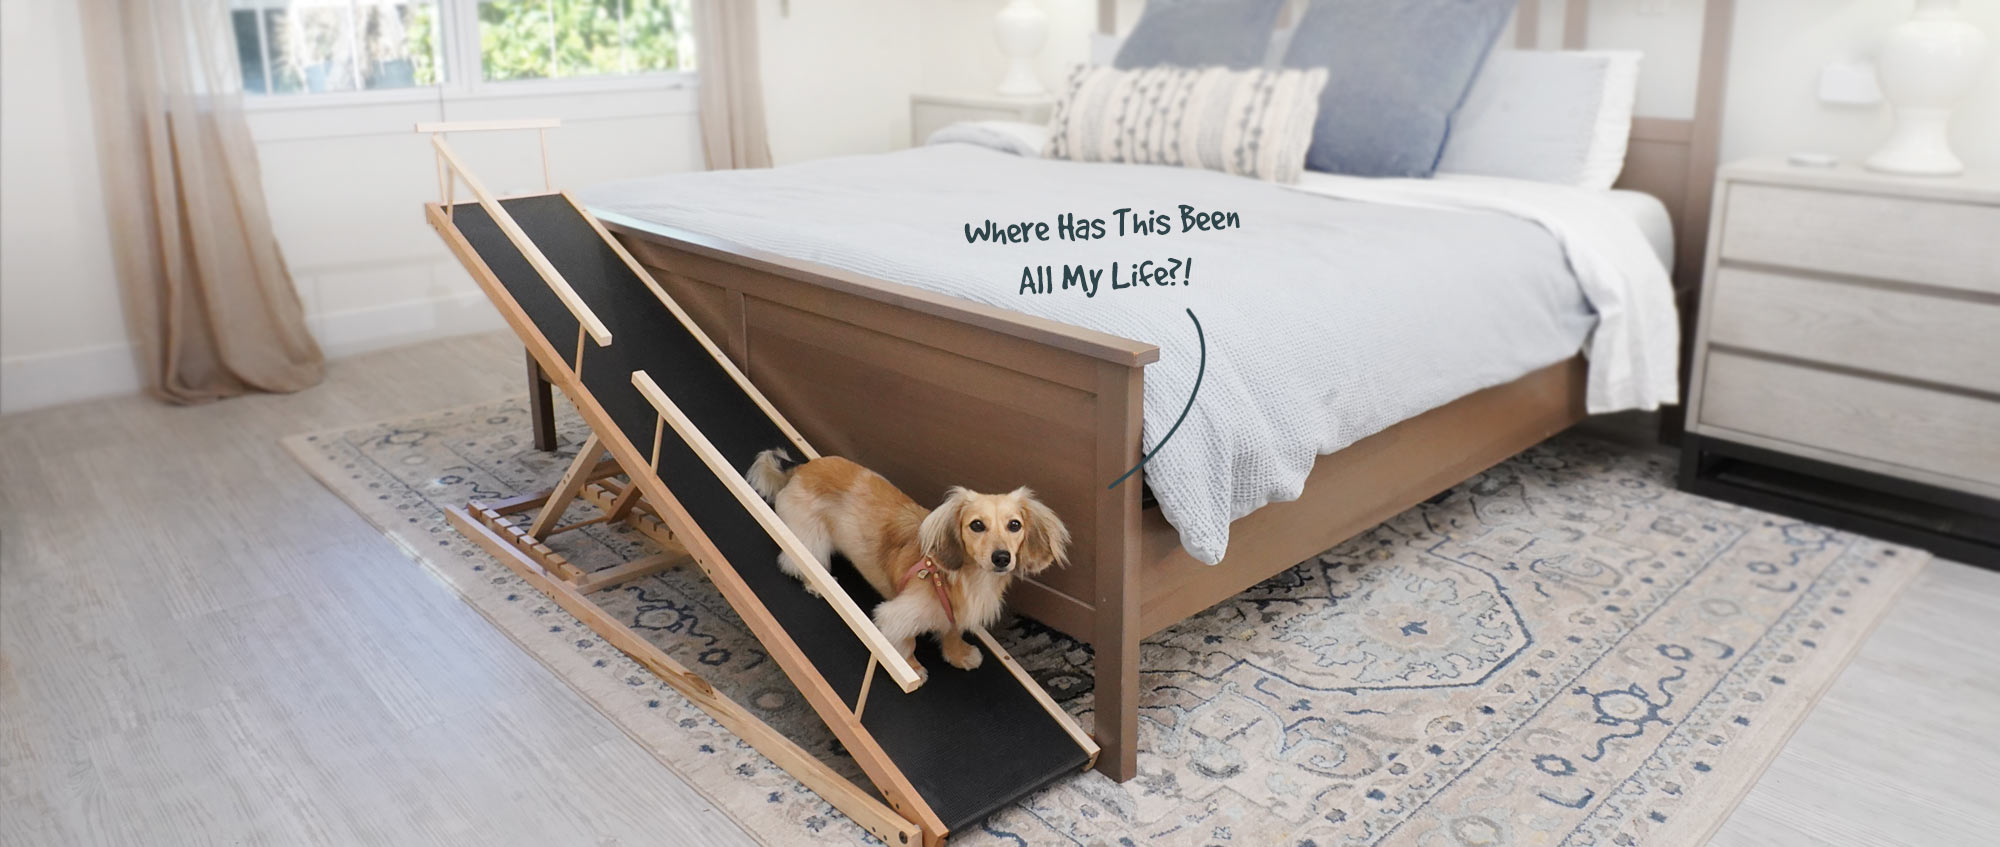 The Small Dog Ramp for Beds, by DoggoRamps™